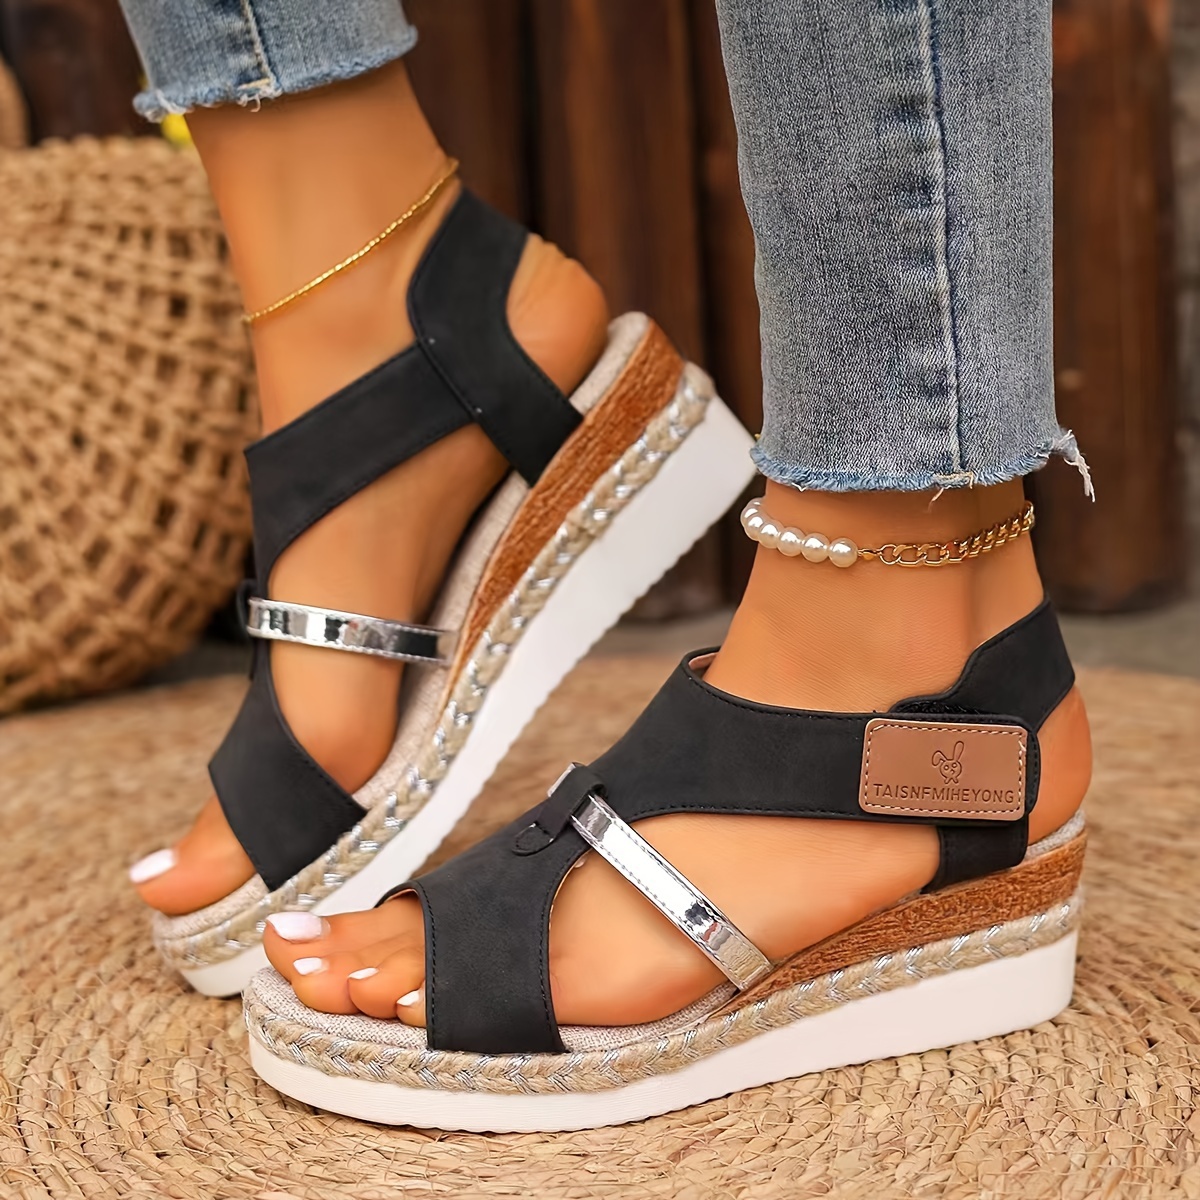 

Women's Summer Espadrille Platform Sandals, Chunky High Heel Open Toe Ankle Strap Fashionable Hollow-out Design